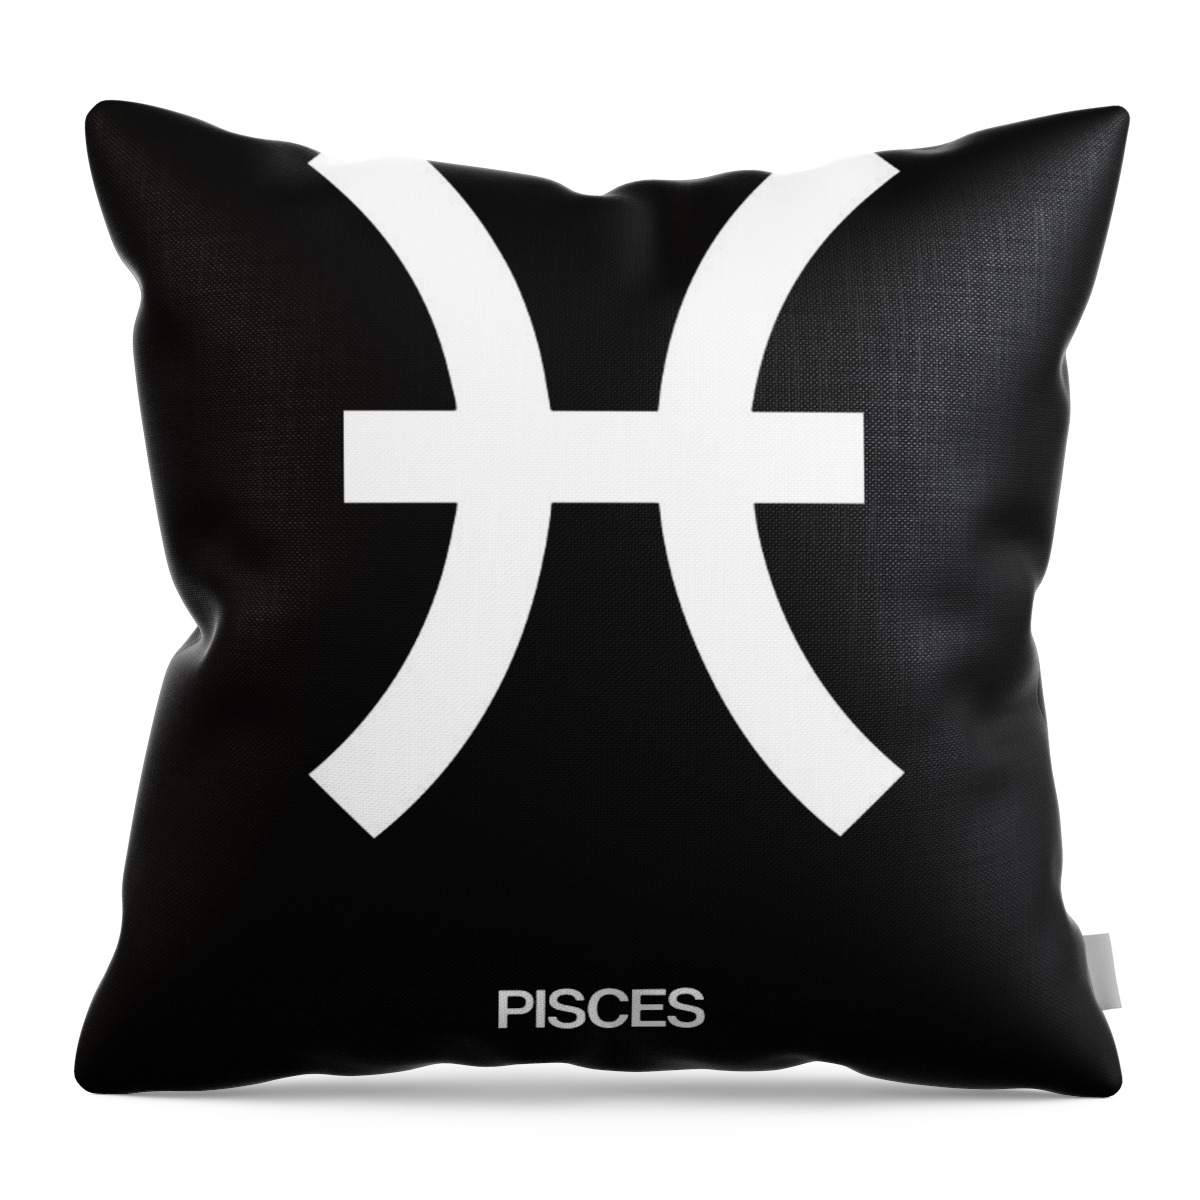 Pisces Throw Pillow featuring the digital art Pisces Zodiac Sign White and Black by Naxart Studio